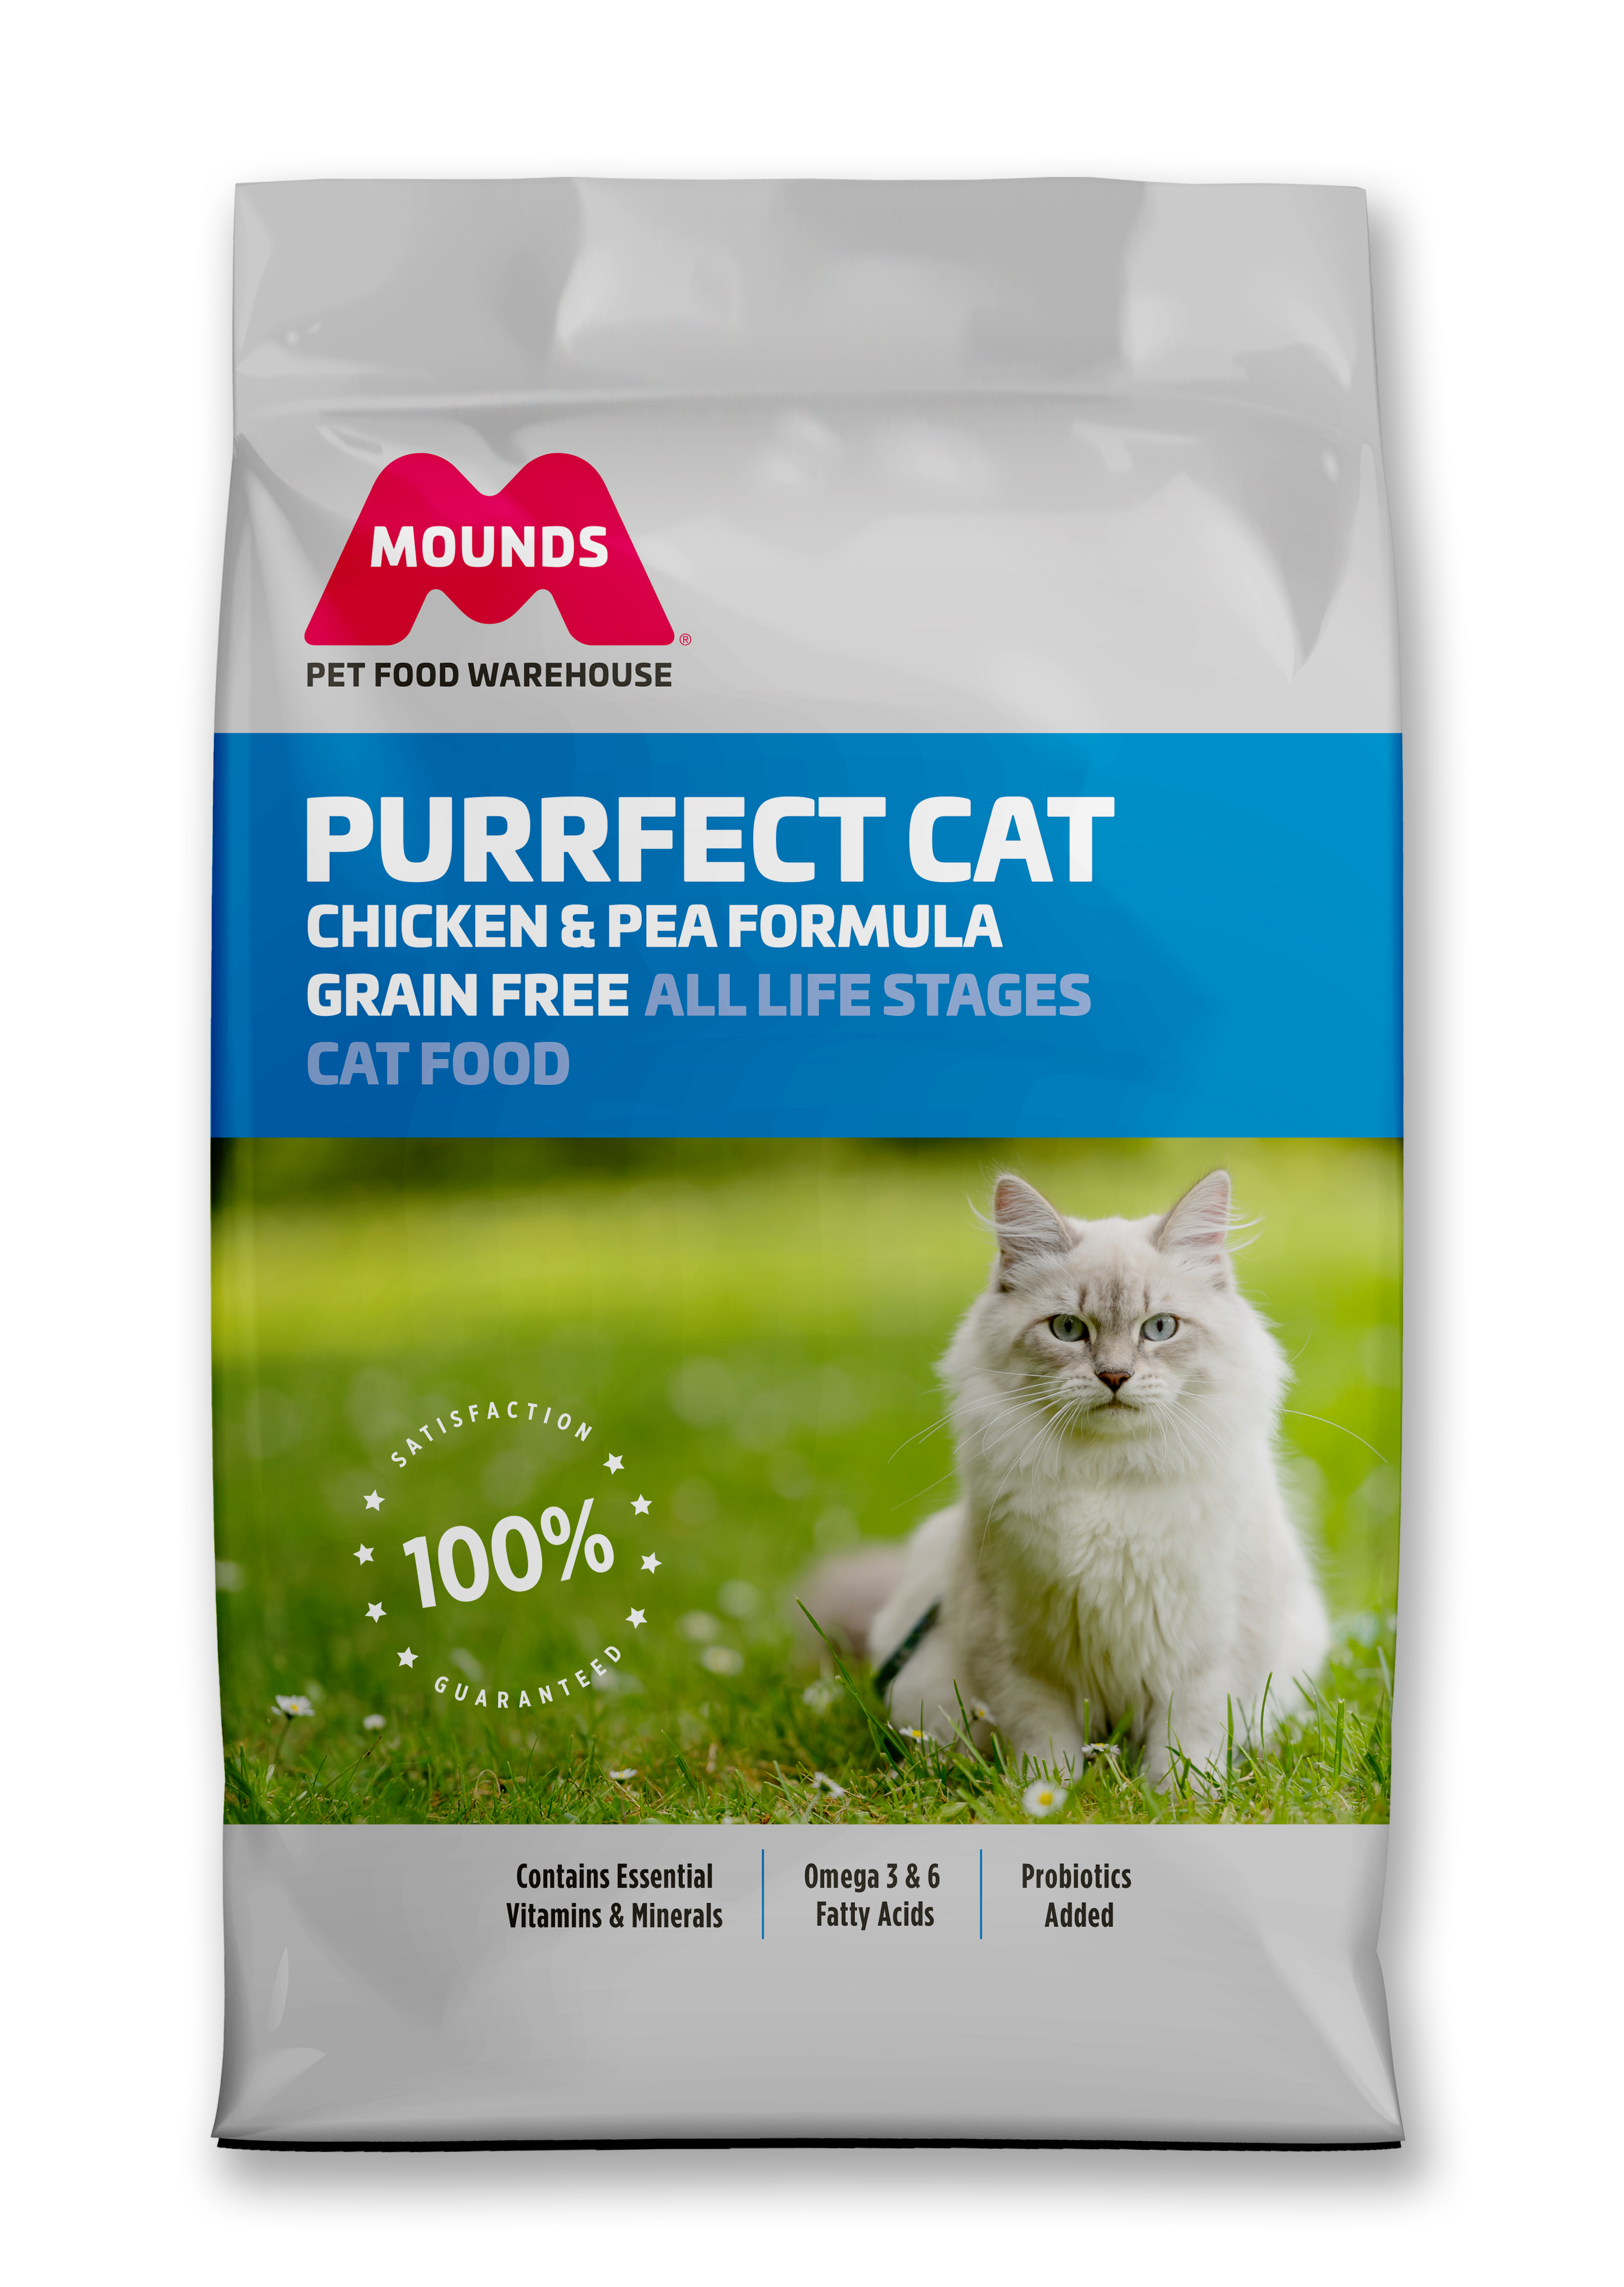 Mounds Purrfect Cat Grain Free Chicken & Pea 20#